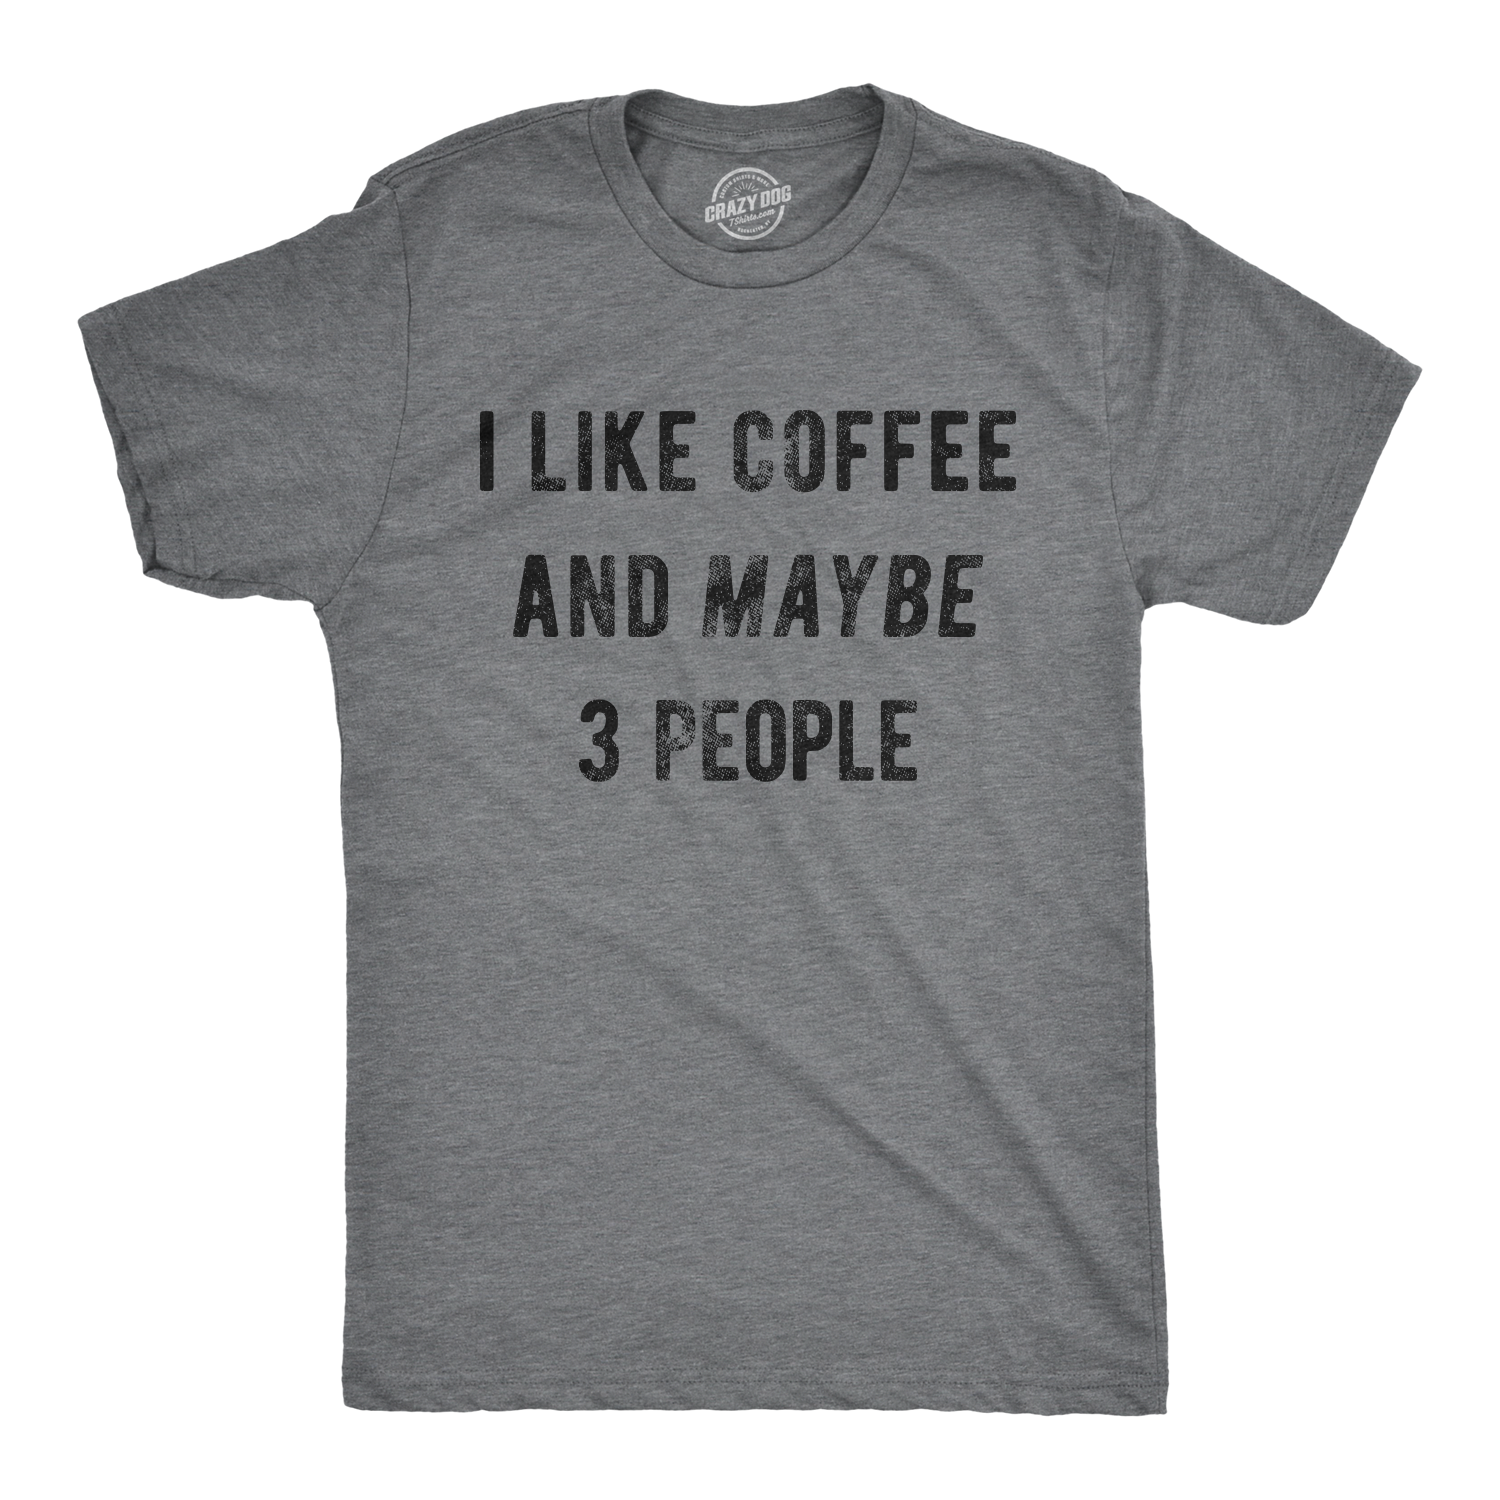 Funny Dark Heather Grey I Like Coffee And Maybe 3 People Mens T Shirt Nerdy Coffee Introvert Tee